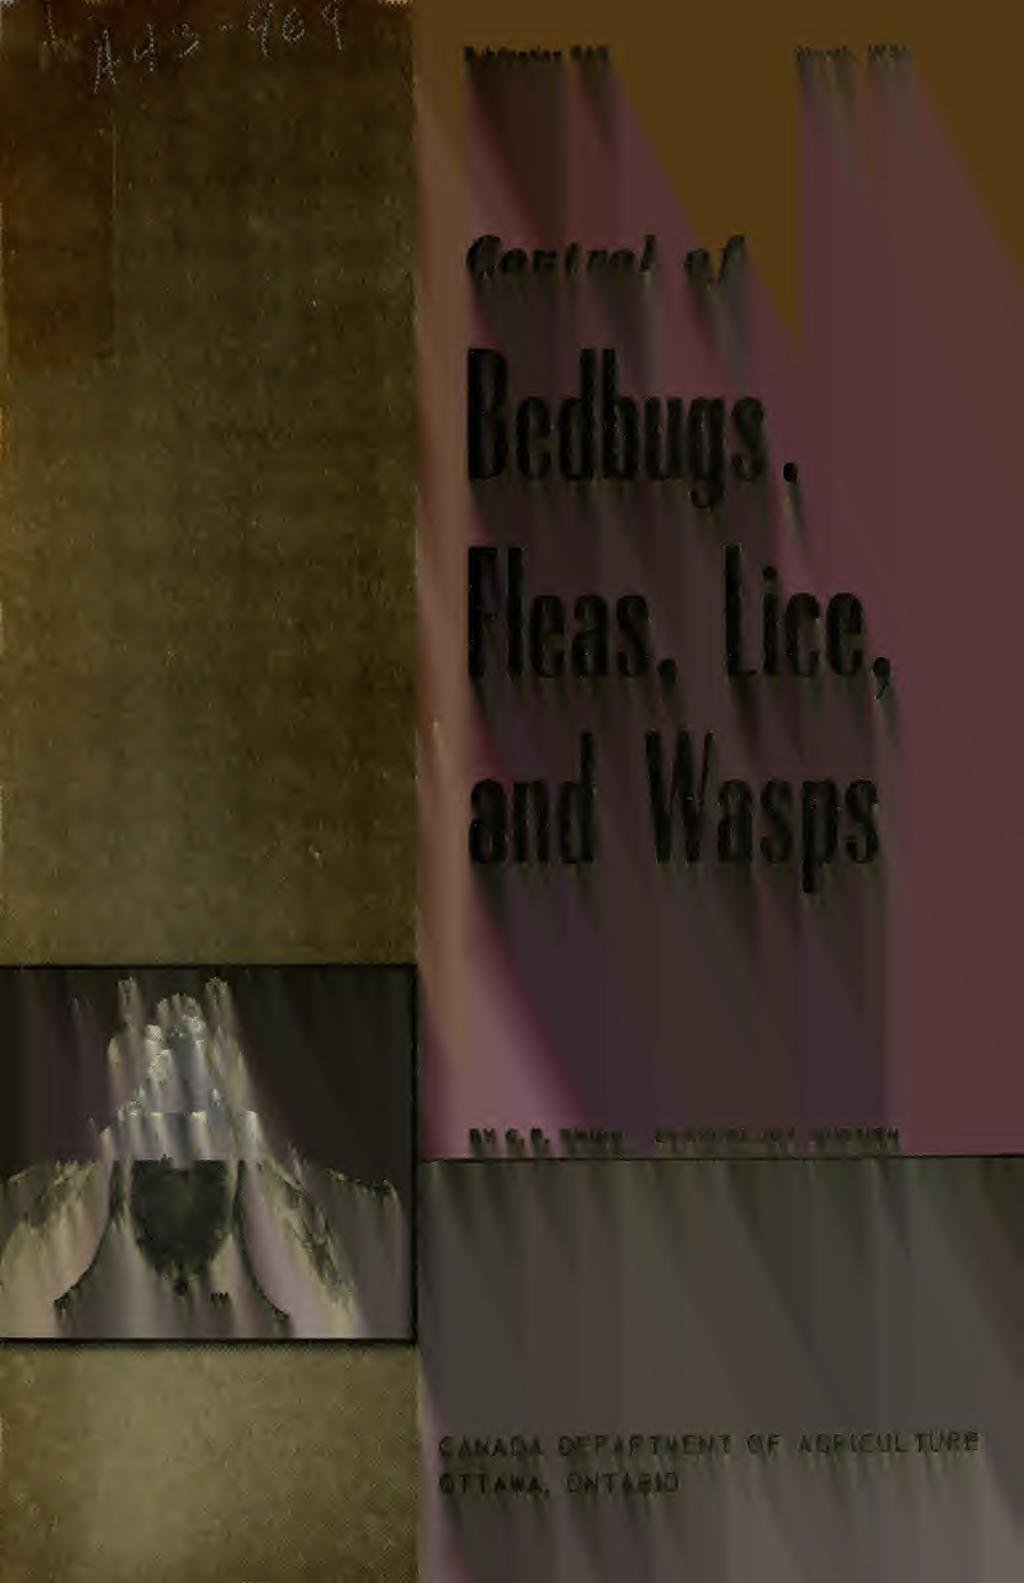 Fleas, Lice, and Wasps BY